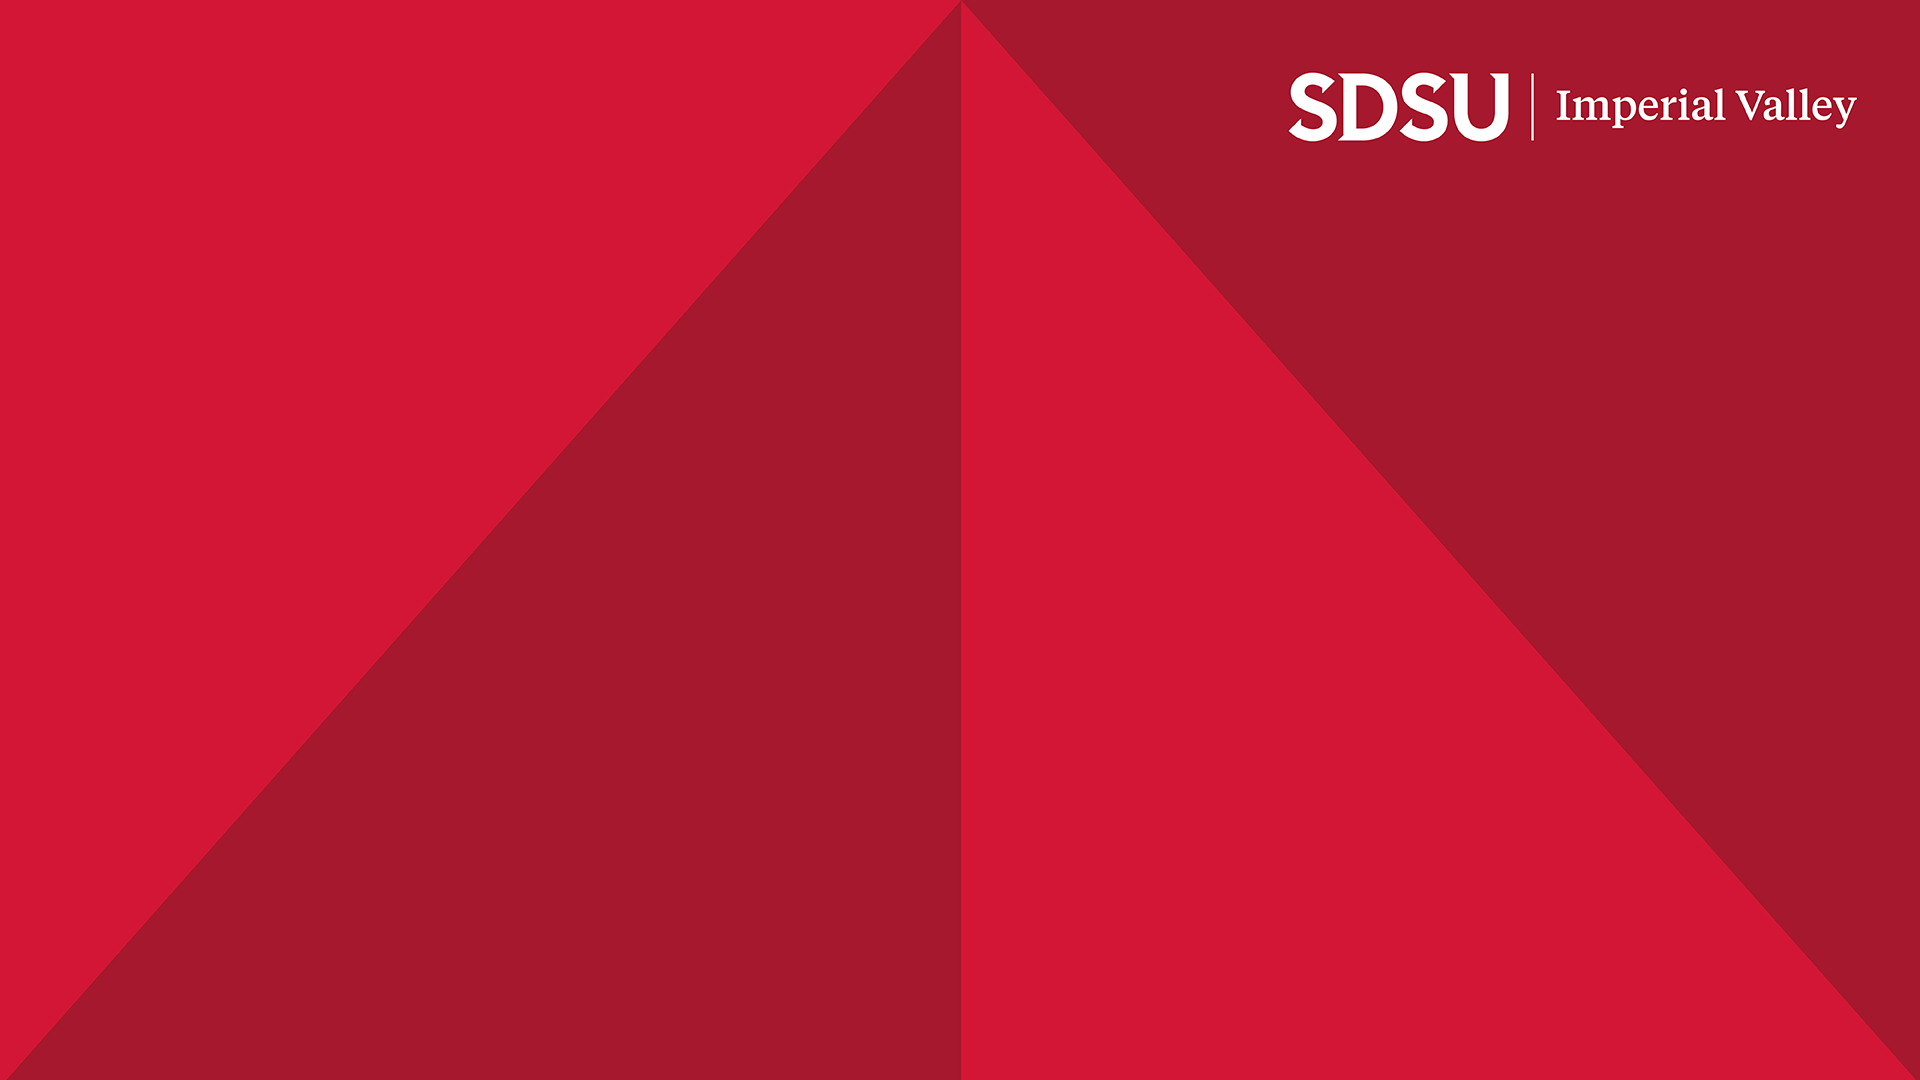 SDSU | Imperial Valley Fall 2022 Semester Orientation Schedule, Rules, Guidelines